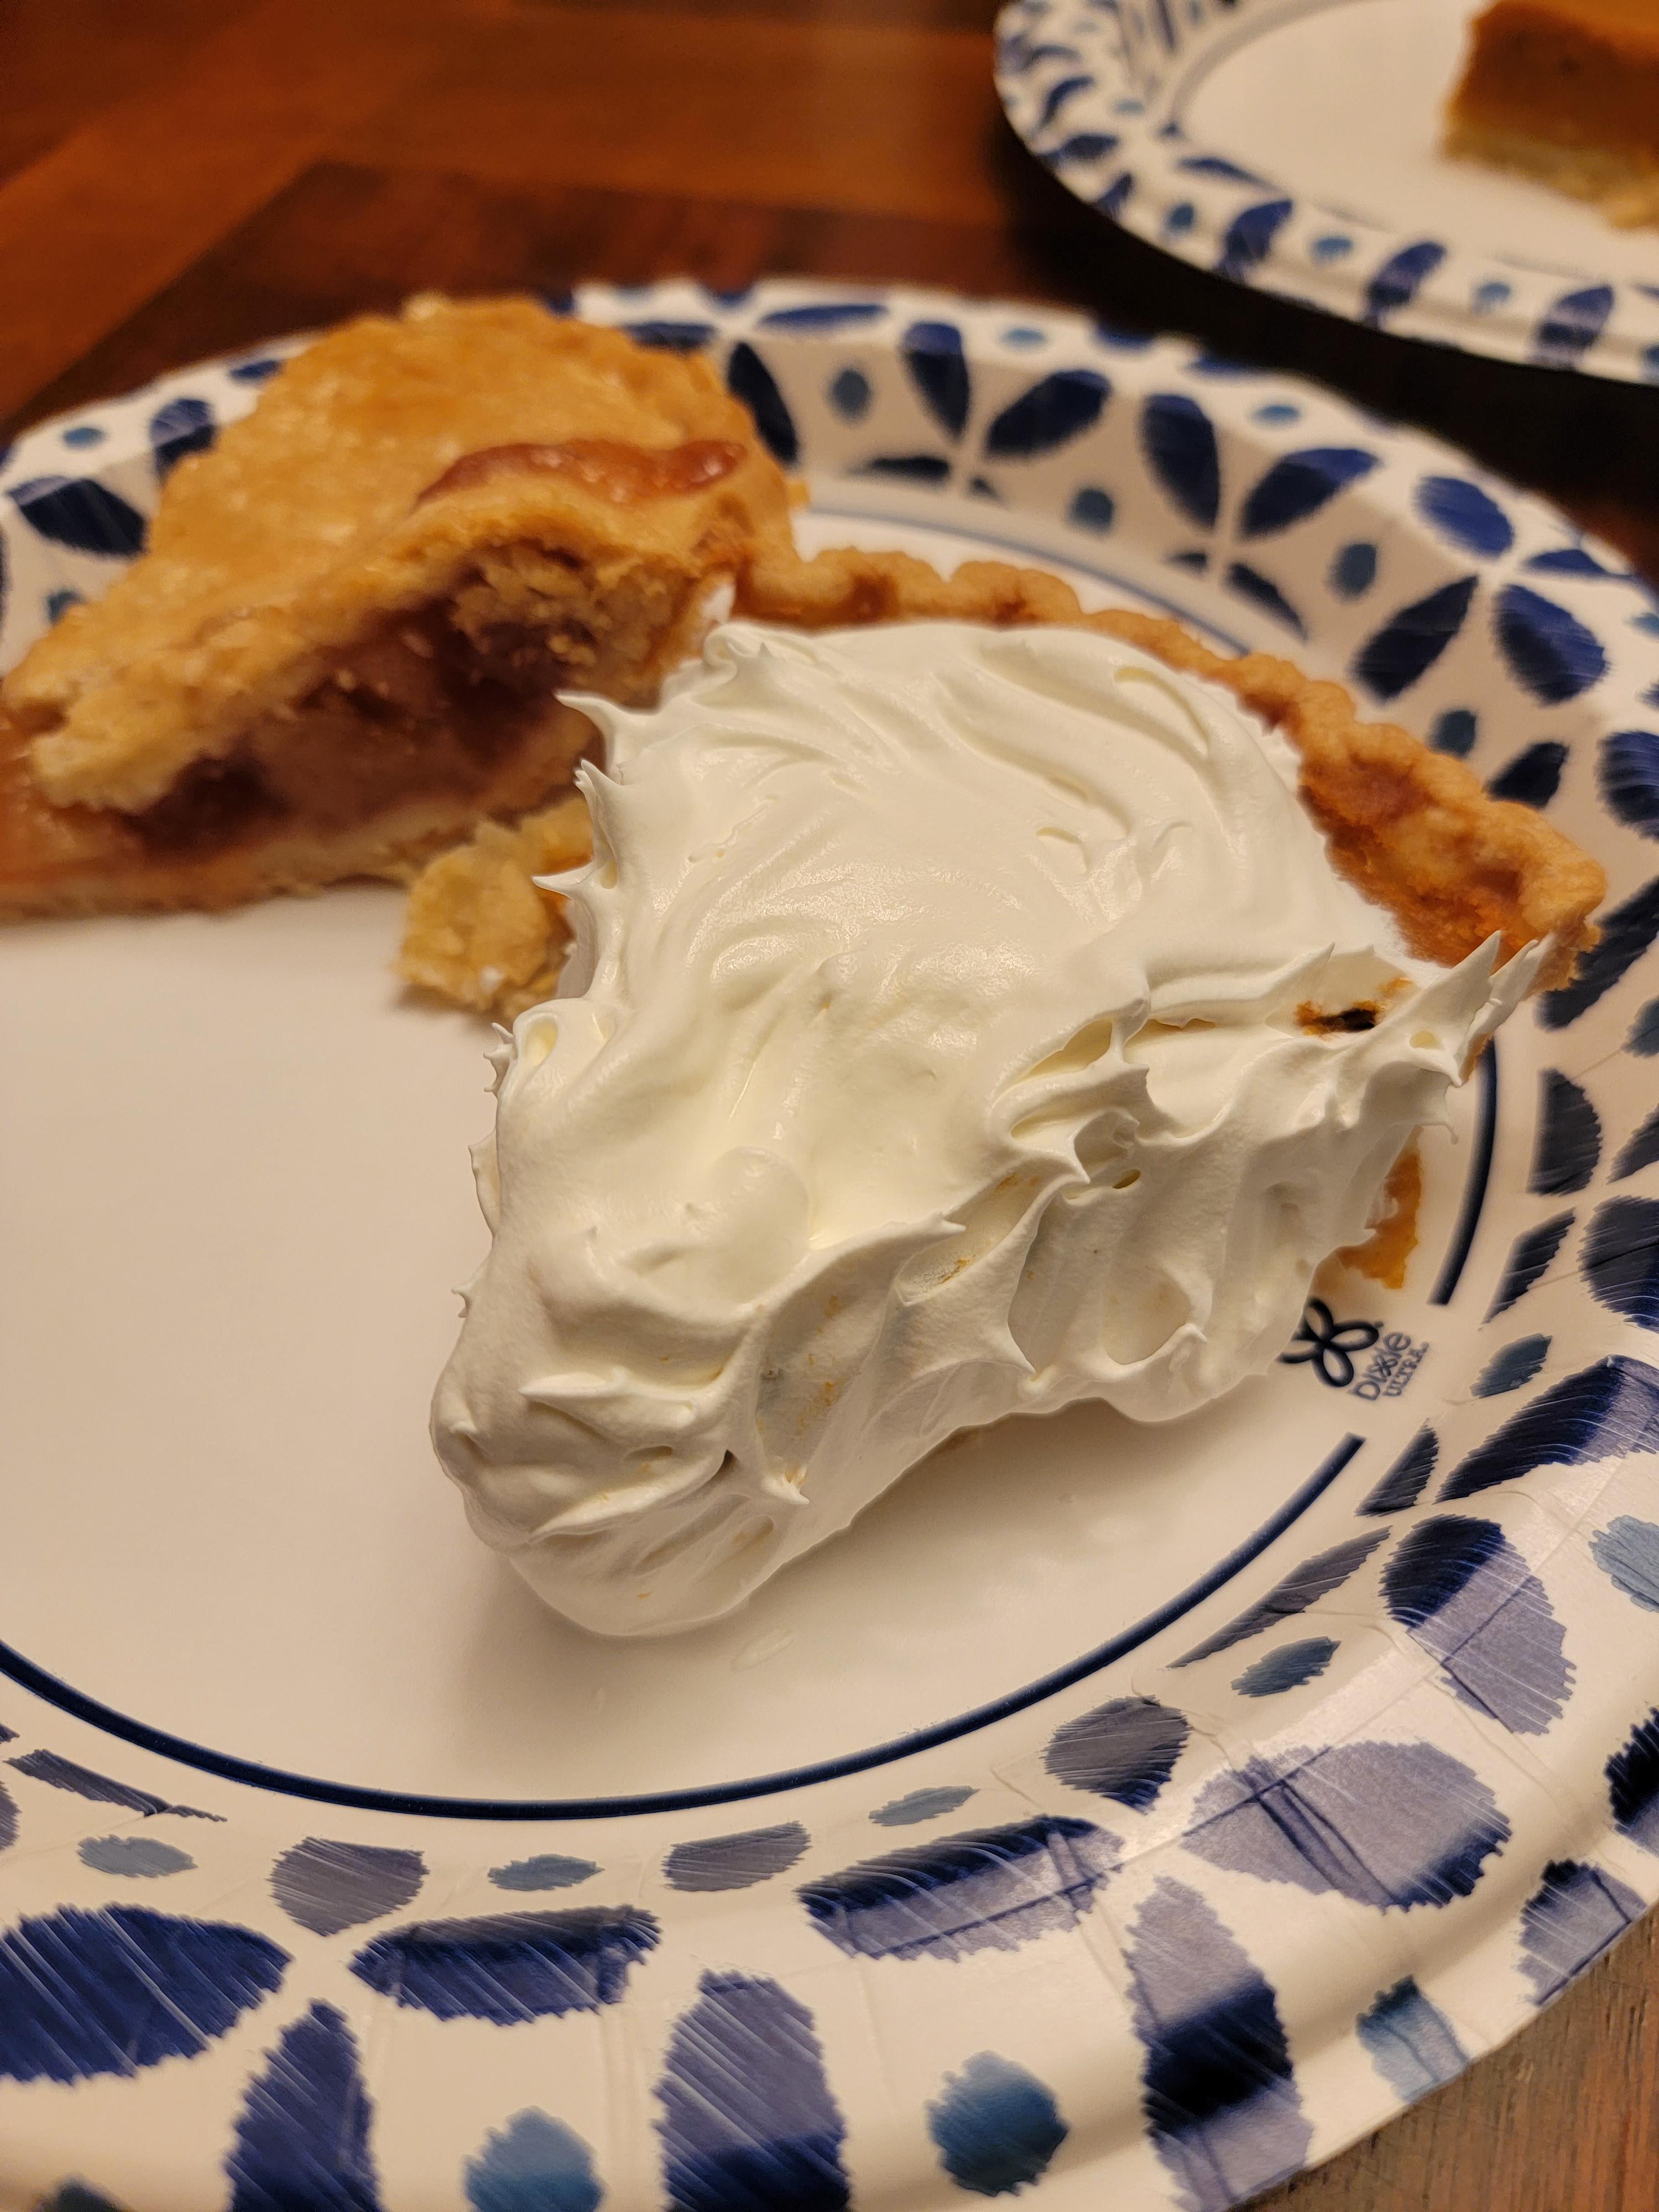 Is this the only acceptable way to eat pumpkin pie?